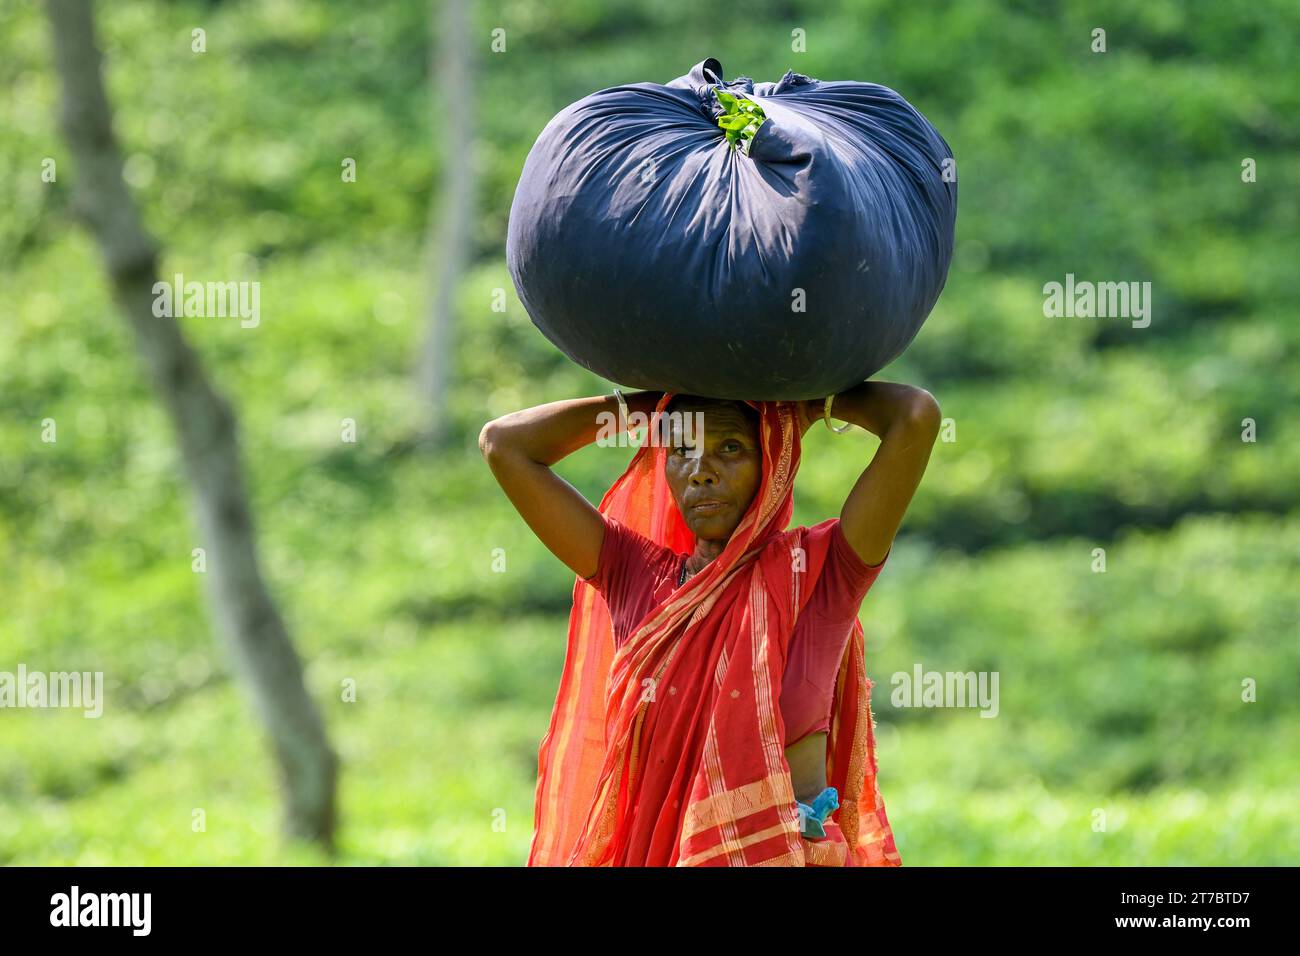 A female worker seen heading back with her picked tea at the tea garden in Moulvibazar. Tea Plucking is a specialized skill. Two leaves and a bud need to be plucked in order to get the best taste of tea and more profits. The calculation of daily wage is 170tk (1.60$) for plucking at least 22-23 kg leaves per day for a worker. The area of Sylhet has over 150 gardens including three of the largest tea gardens in the world. Nearly 300,000 workers are employed on the tea estates of which over 75% are women. Working conditions and wages are considered to be very low. (Photo by Piyas Biswas/SOPA I Stock Photo